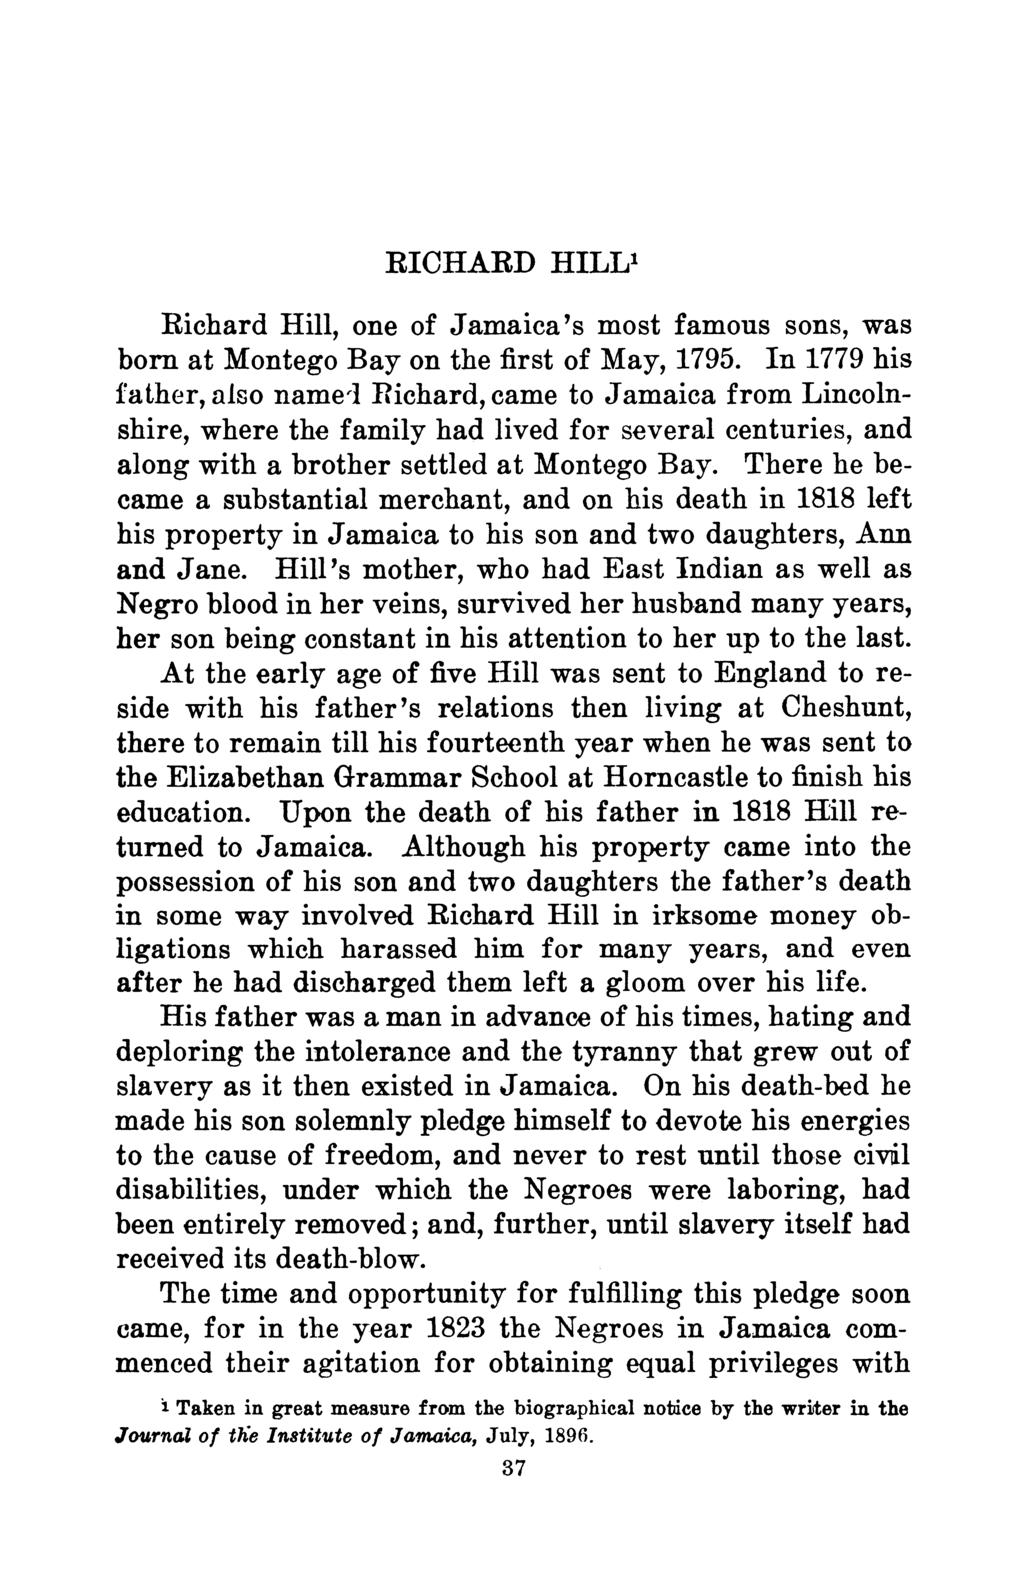 RICHARD HILL1 Richard Hill, one of Jamaica's most famous sons, was born at Montego Bay on the first of May, 1795.